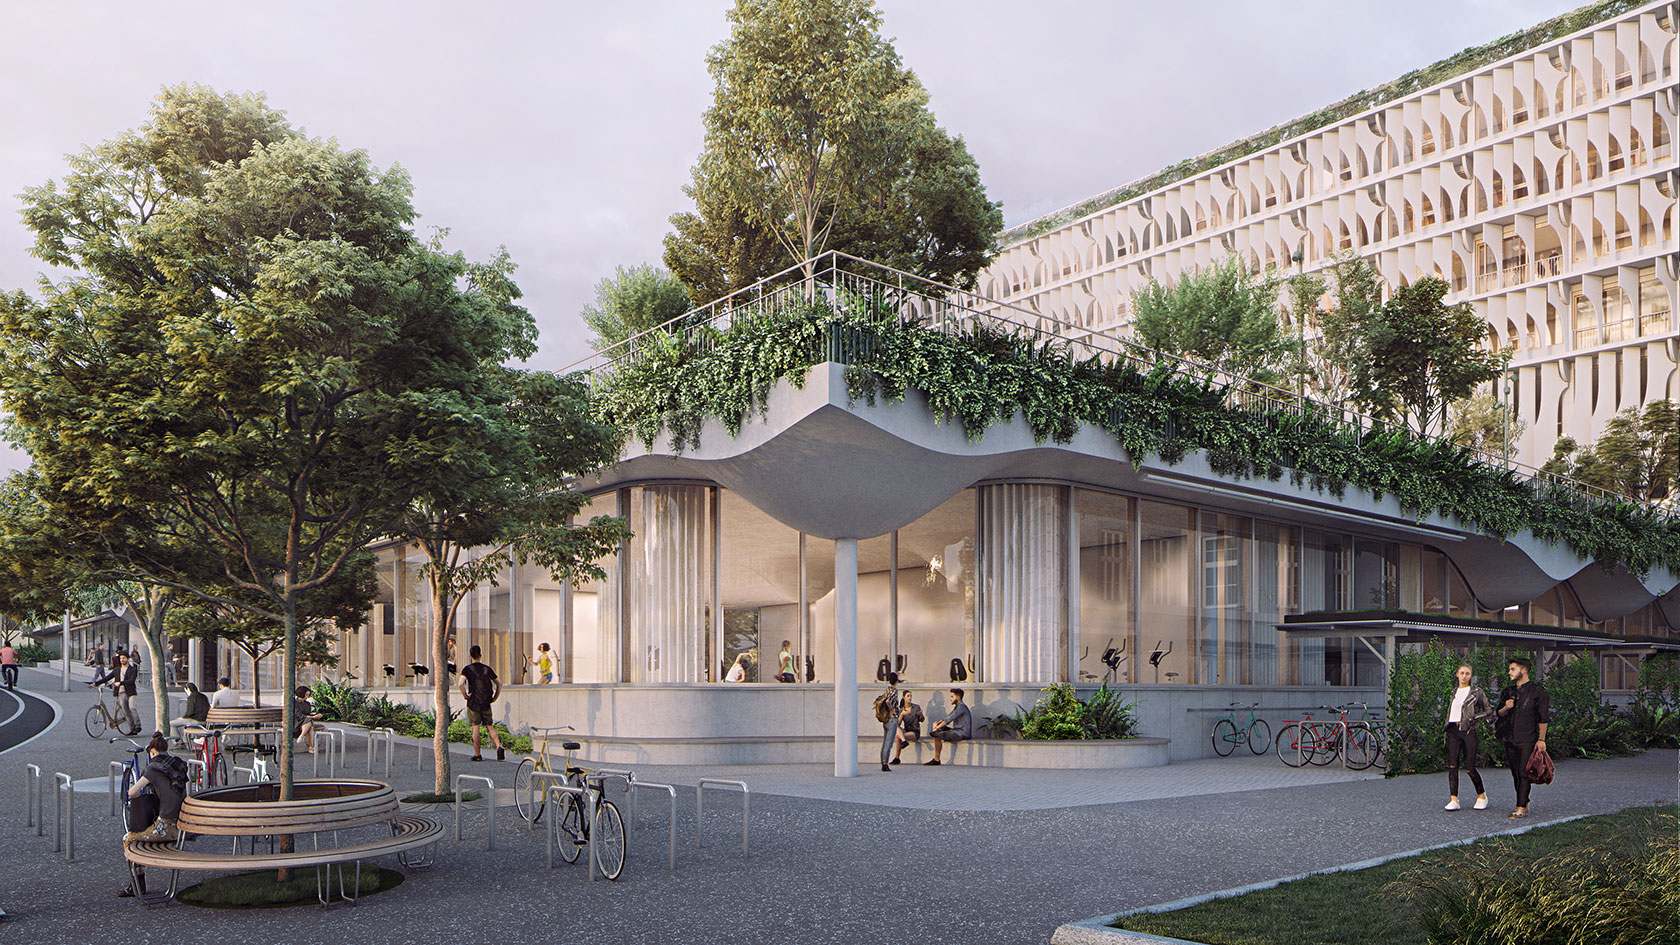 The FORUM UZH education and research centre will significantly enhance the university quarter.